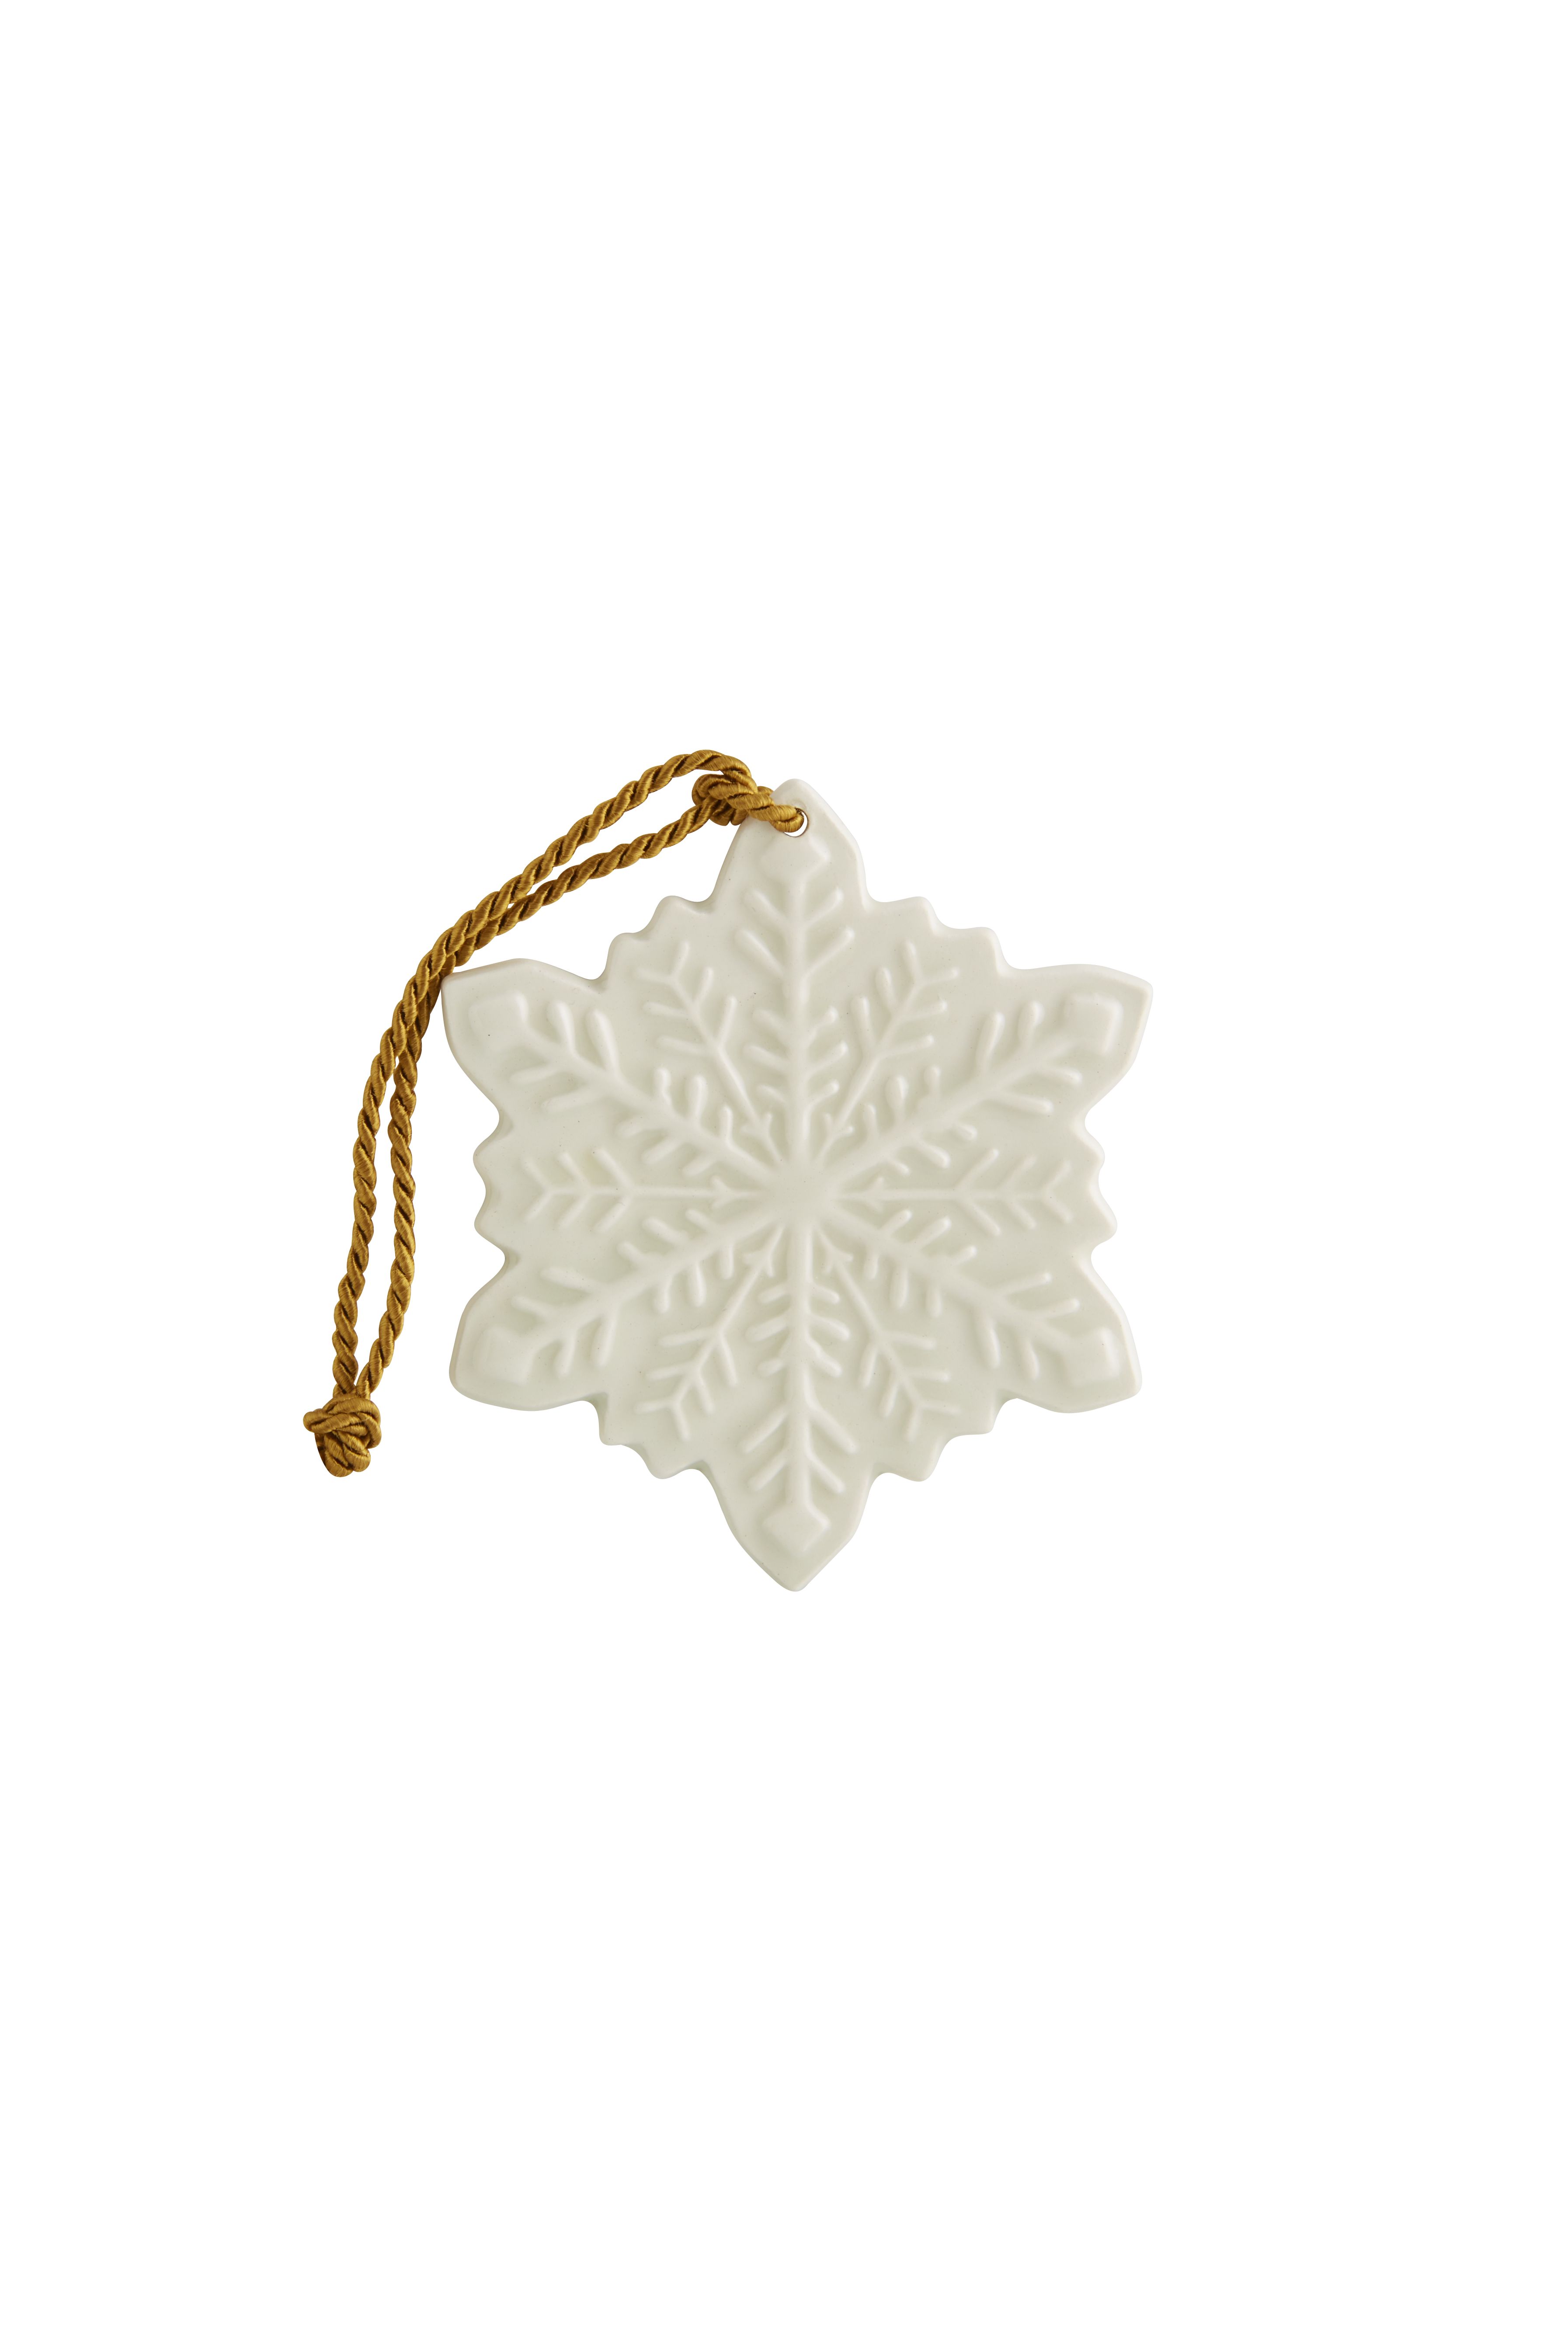 Snowflake Pendent, , large image number null